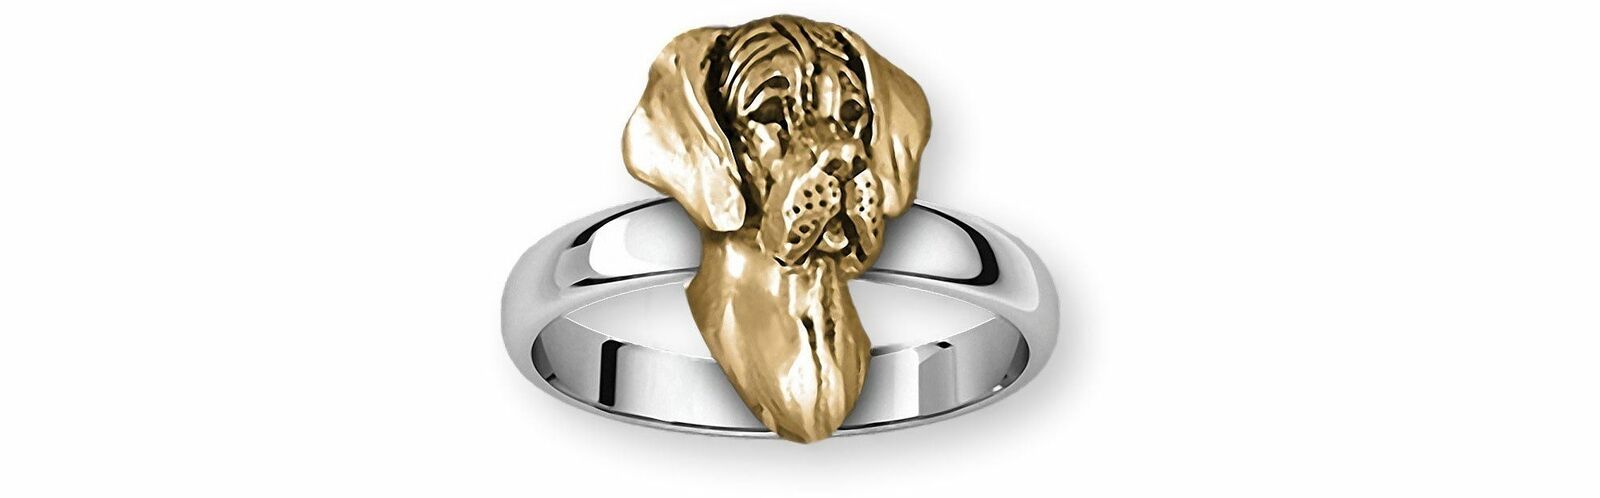 Great Dane Jewelry Silver And 14k Gold Handmade Great Dane Ring  Gd16h-tnr